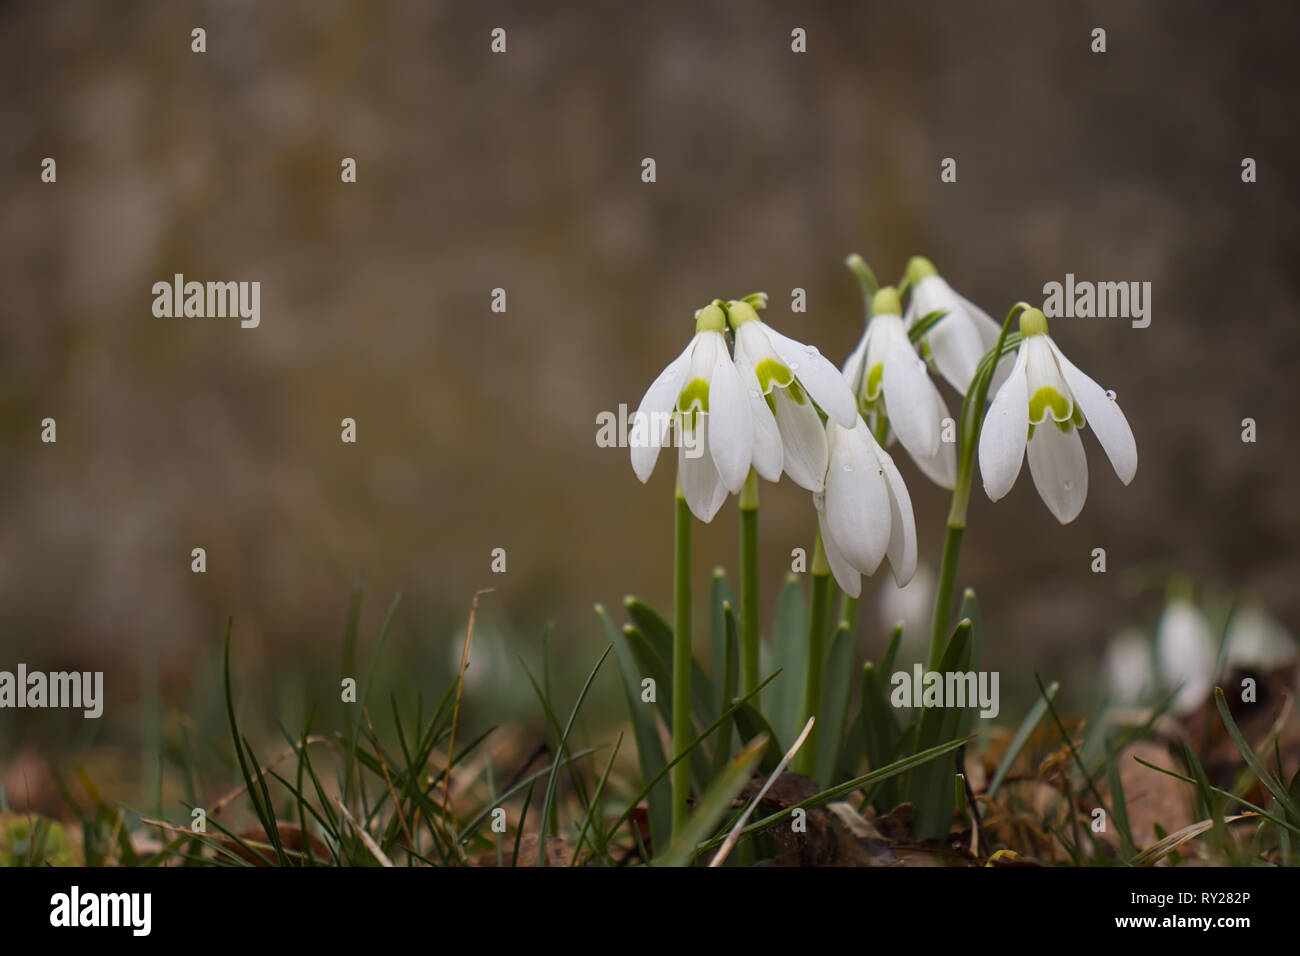 Group of snowdrops (Galanthus plicatus) growing in meadow. Stock Photo